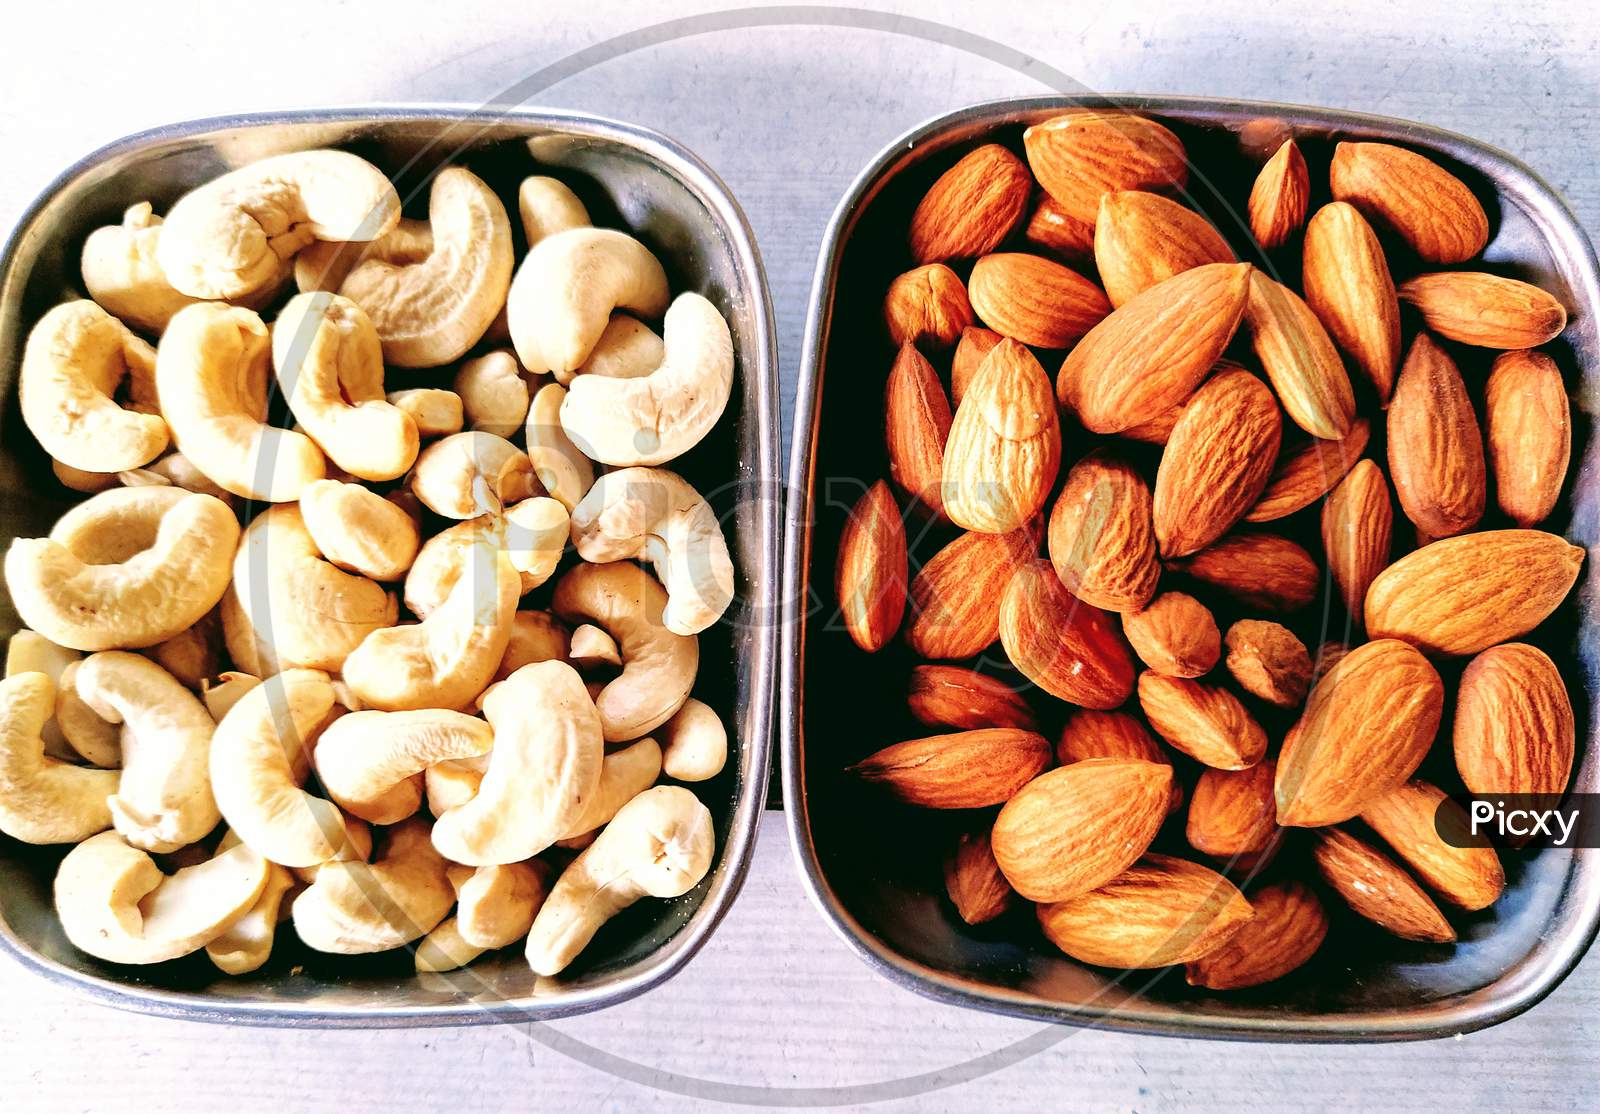 Almonds and cashew nuts together dry fruits